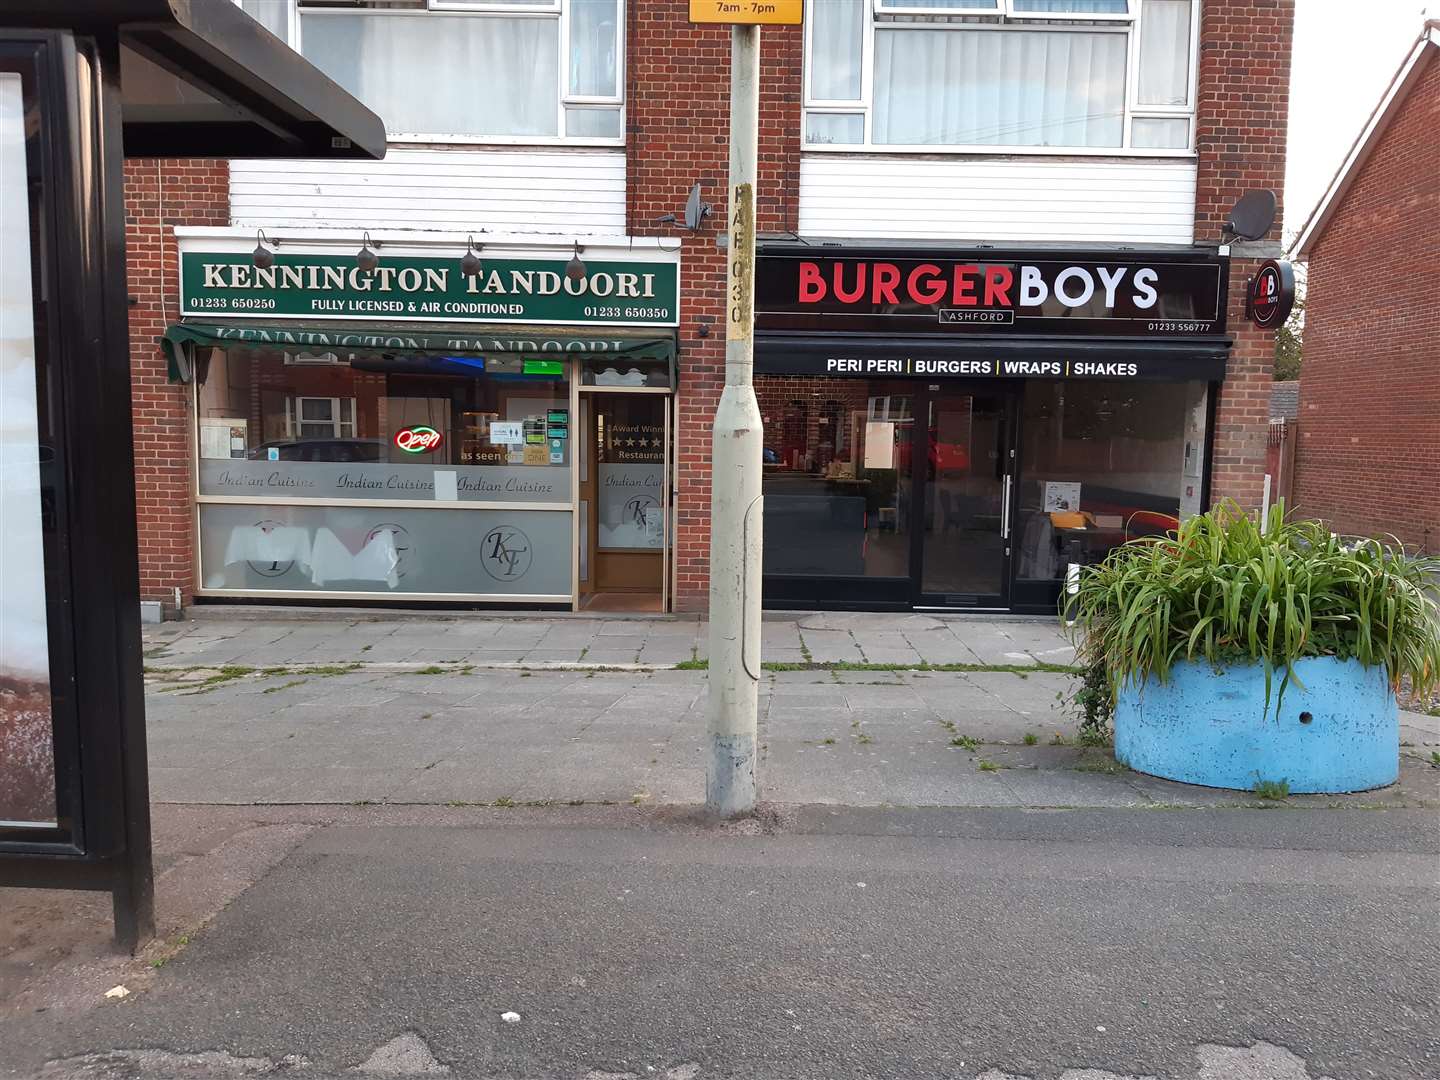 A patio area is planned for the front of Kennington Tandoori and Burger Boys, which are both owned by Ash Miah